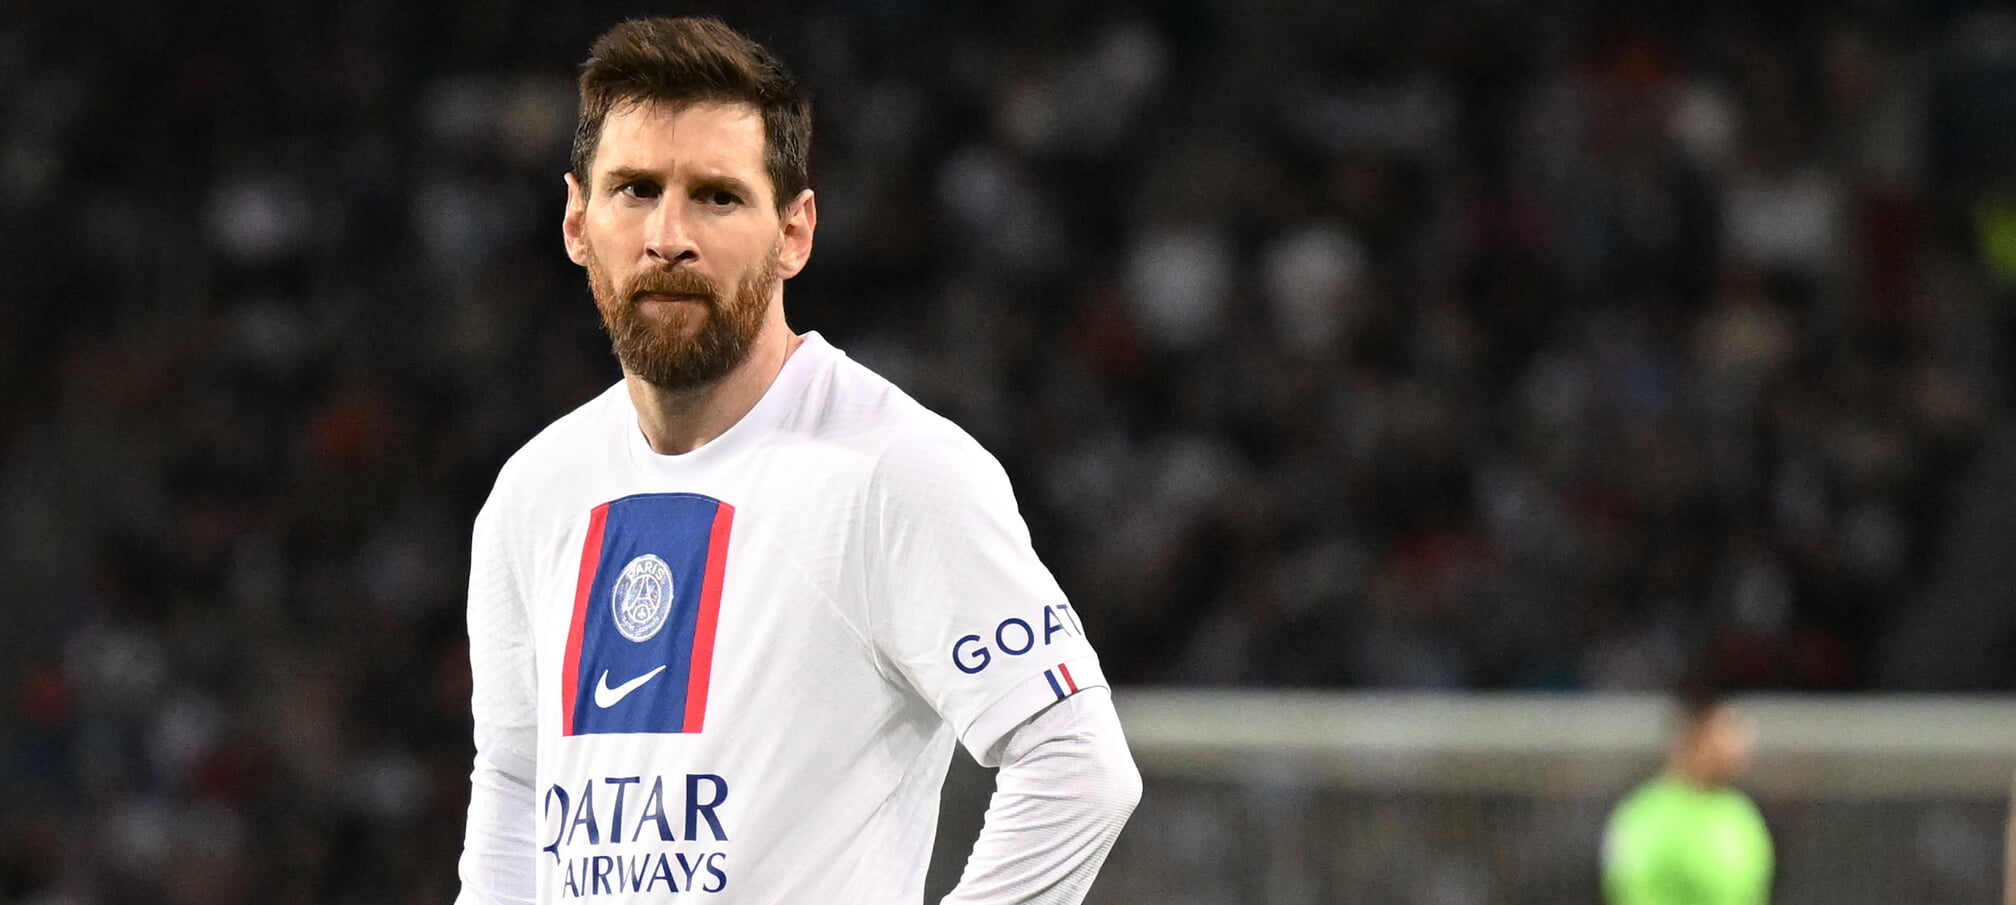 Where is Lionel Messi and why he is not playing for PSG today in the lineup  vs Troyes